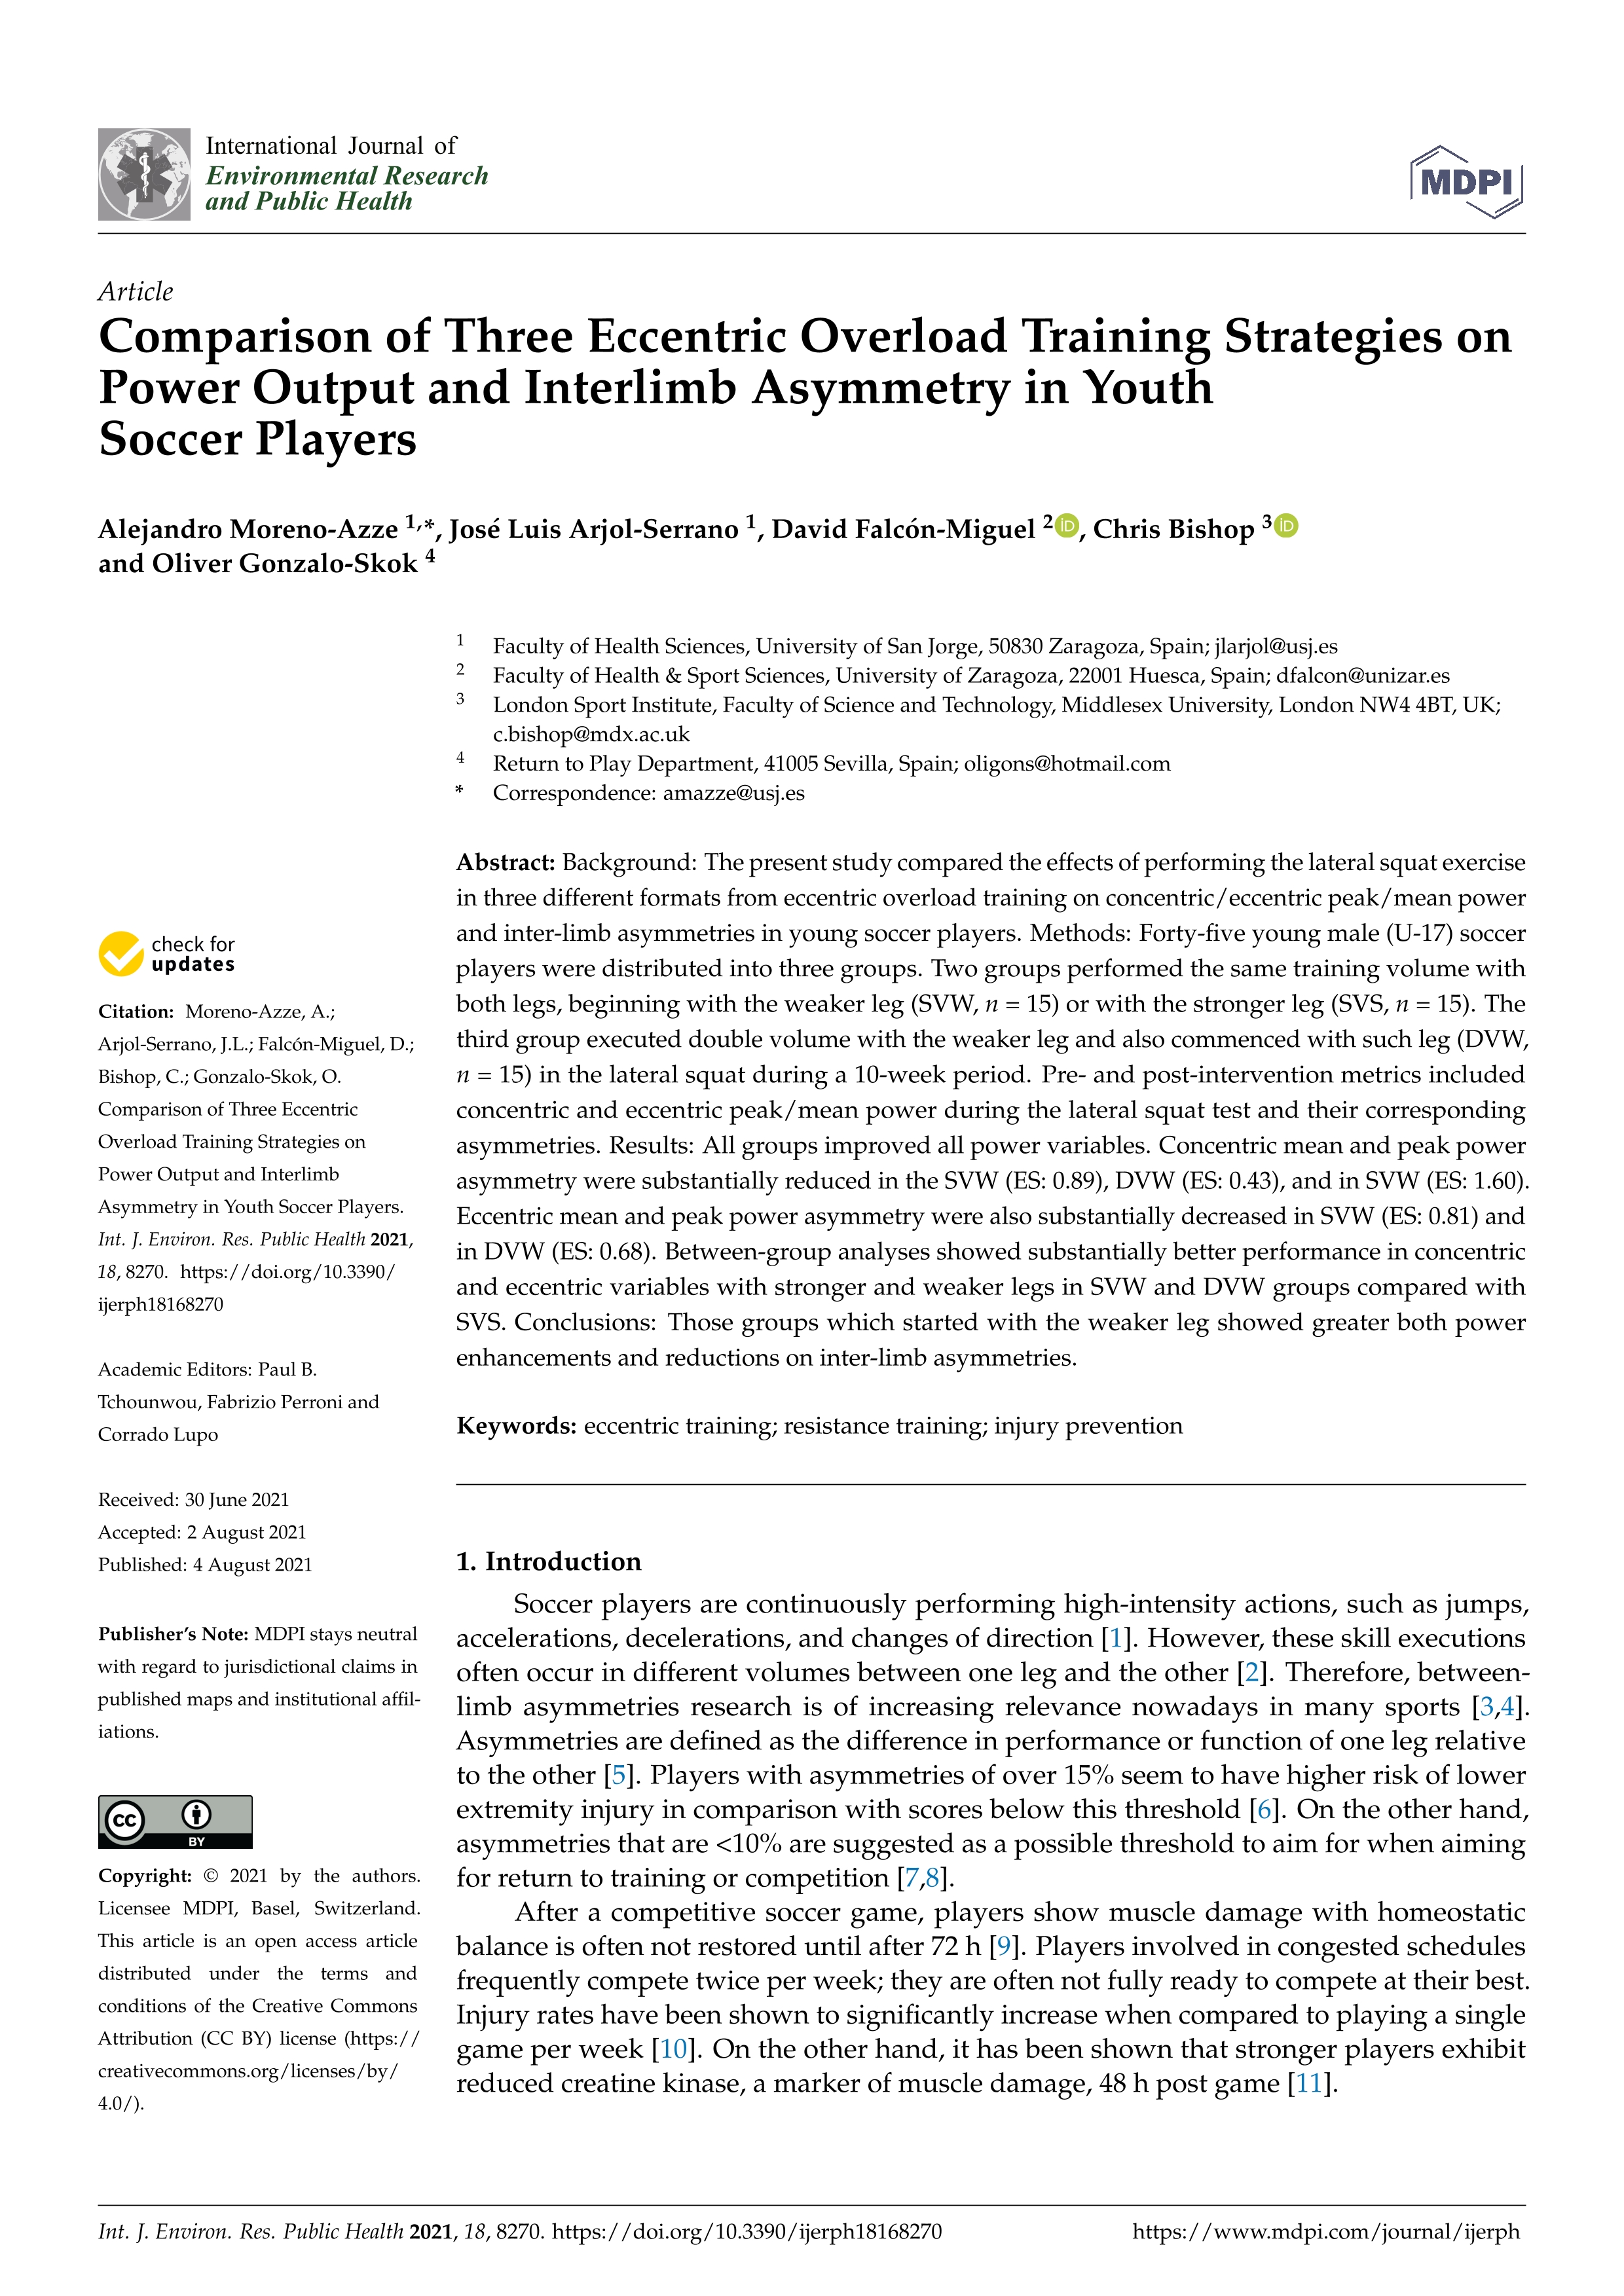 Comparison of three eccentric overload training strategies on power output and interlimb asymmetry in youth soccer players